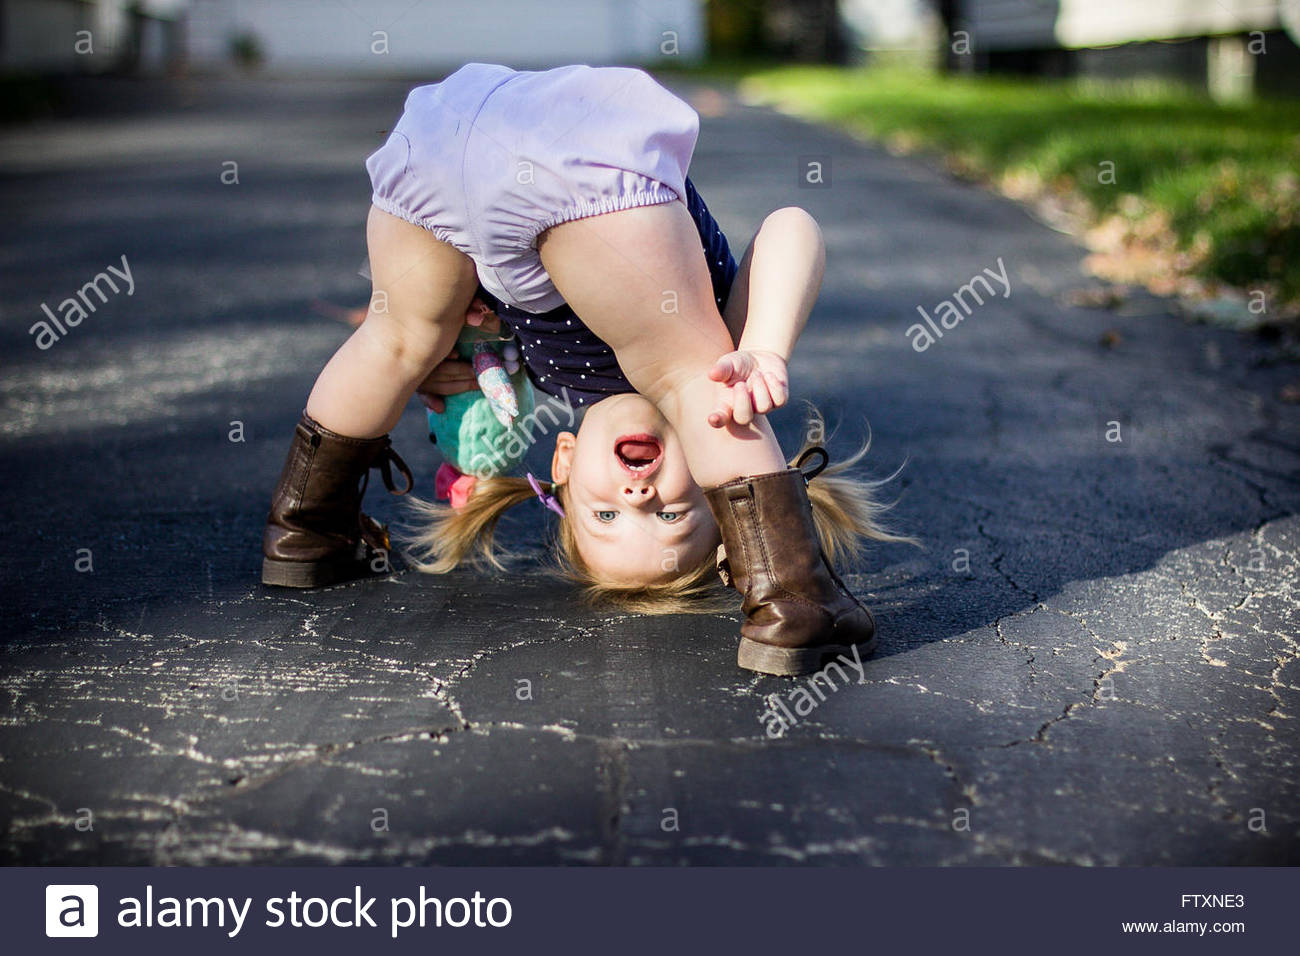 Girl Bending Over And Looking Through Her Legs Upside Down Stock Photo